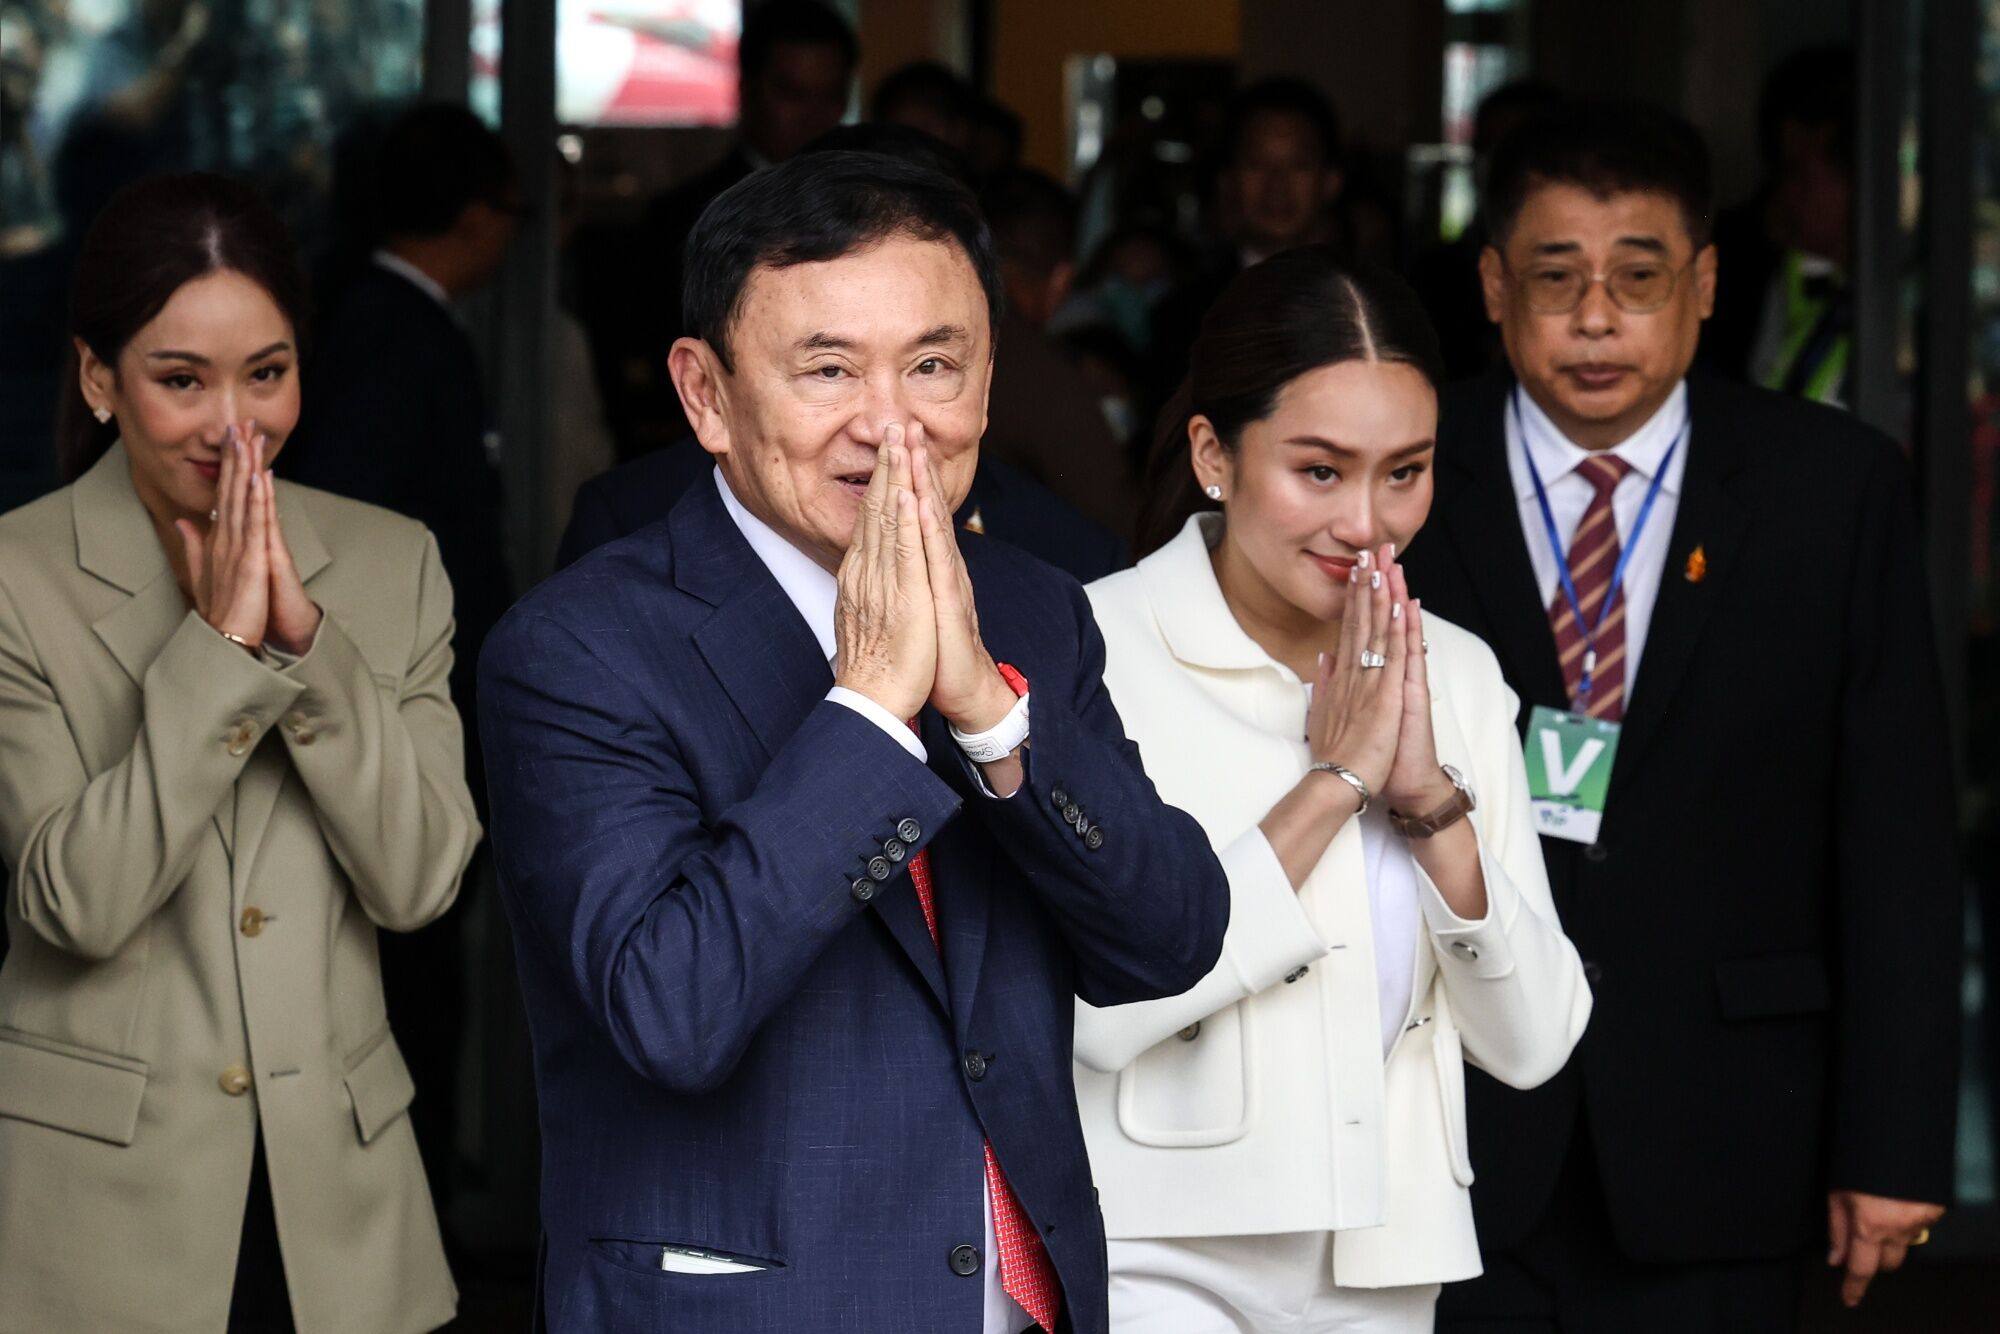 Thaksin Shinawatra, Thailand’s former prime minister (centre) arrives at Don Mueang airport in Bangkok, Thailand after returning from self-exile on August 22, 2023. Photo: Bloomberg